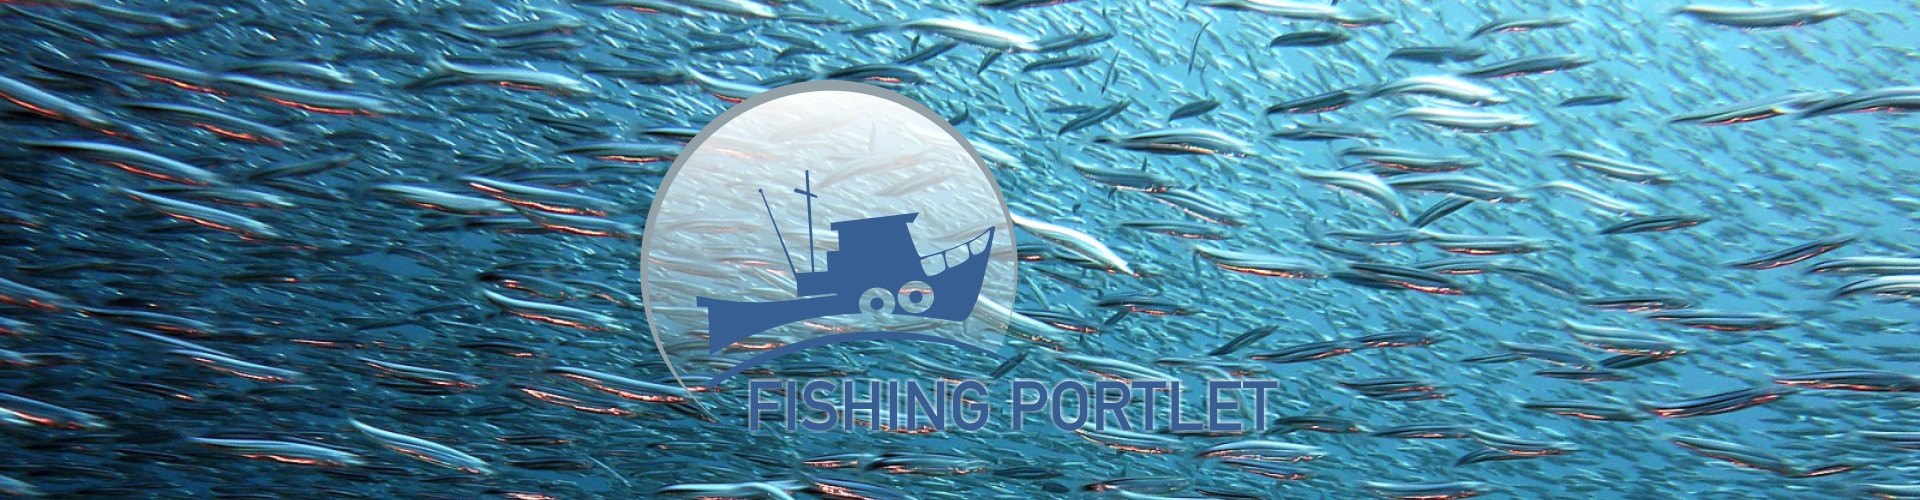 Fishing Portlet - A large group of fish in the ocean